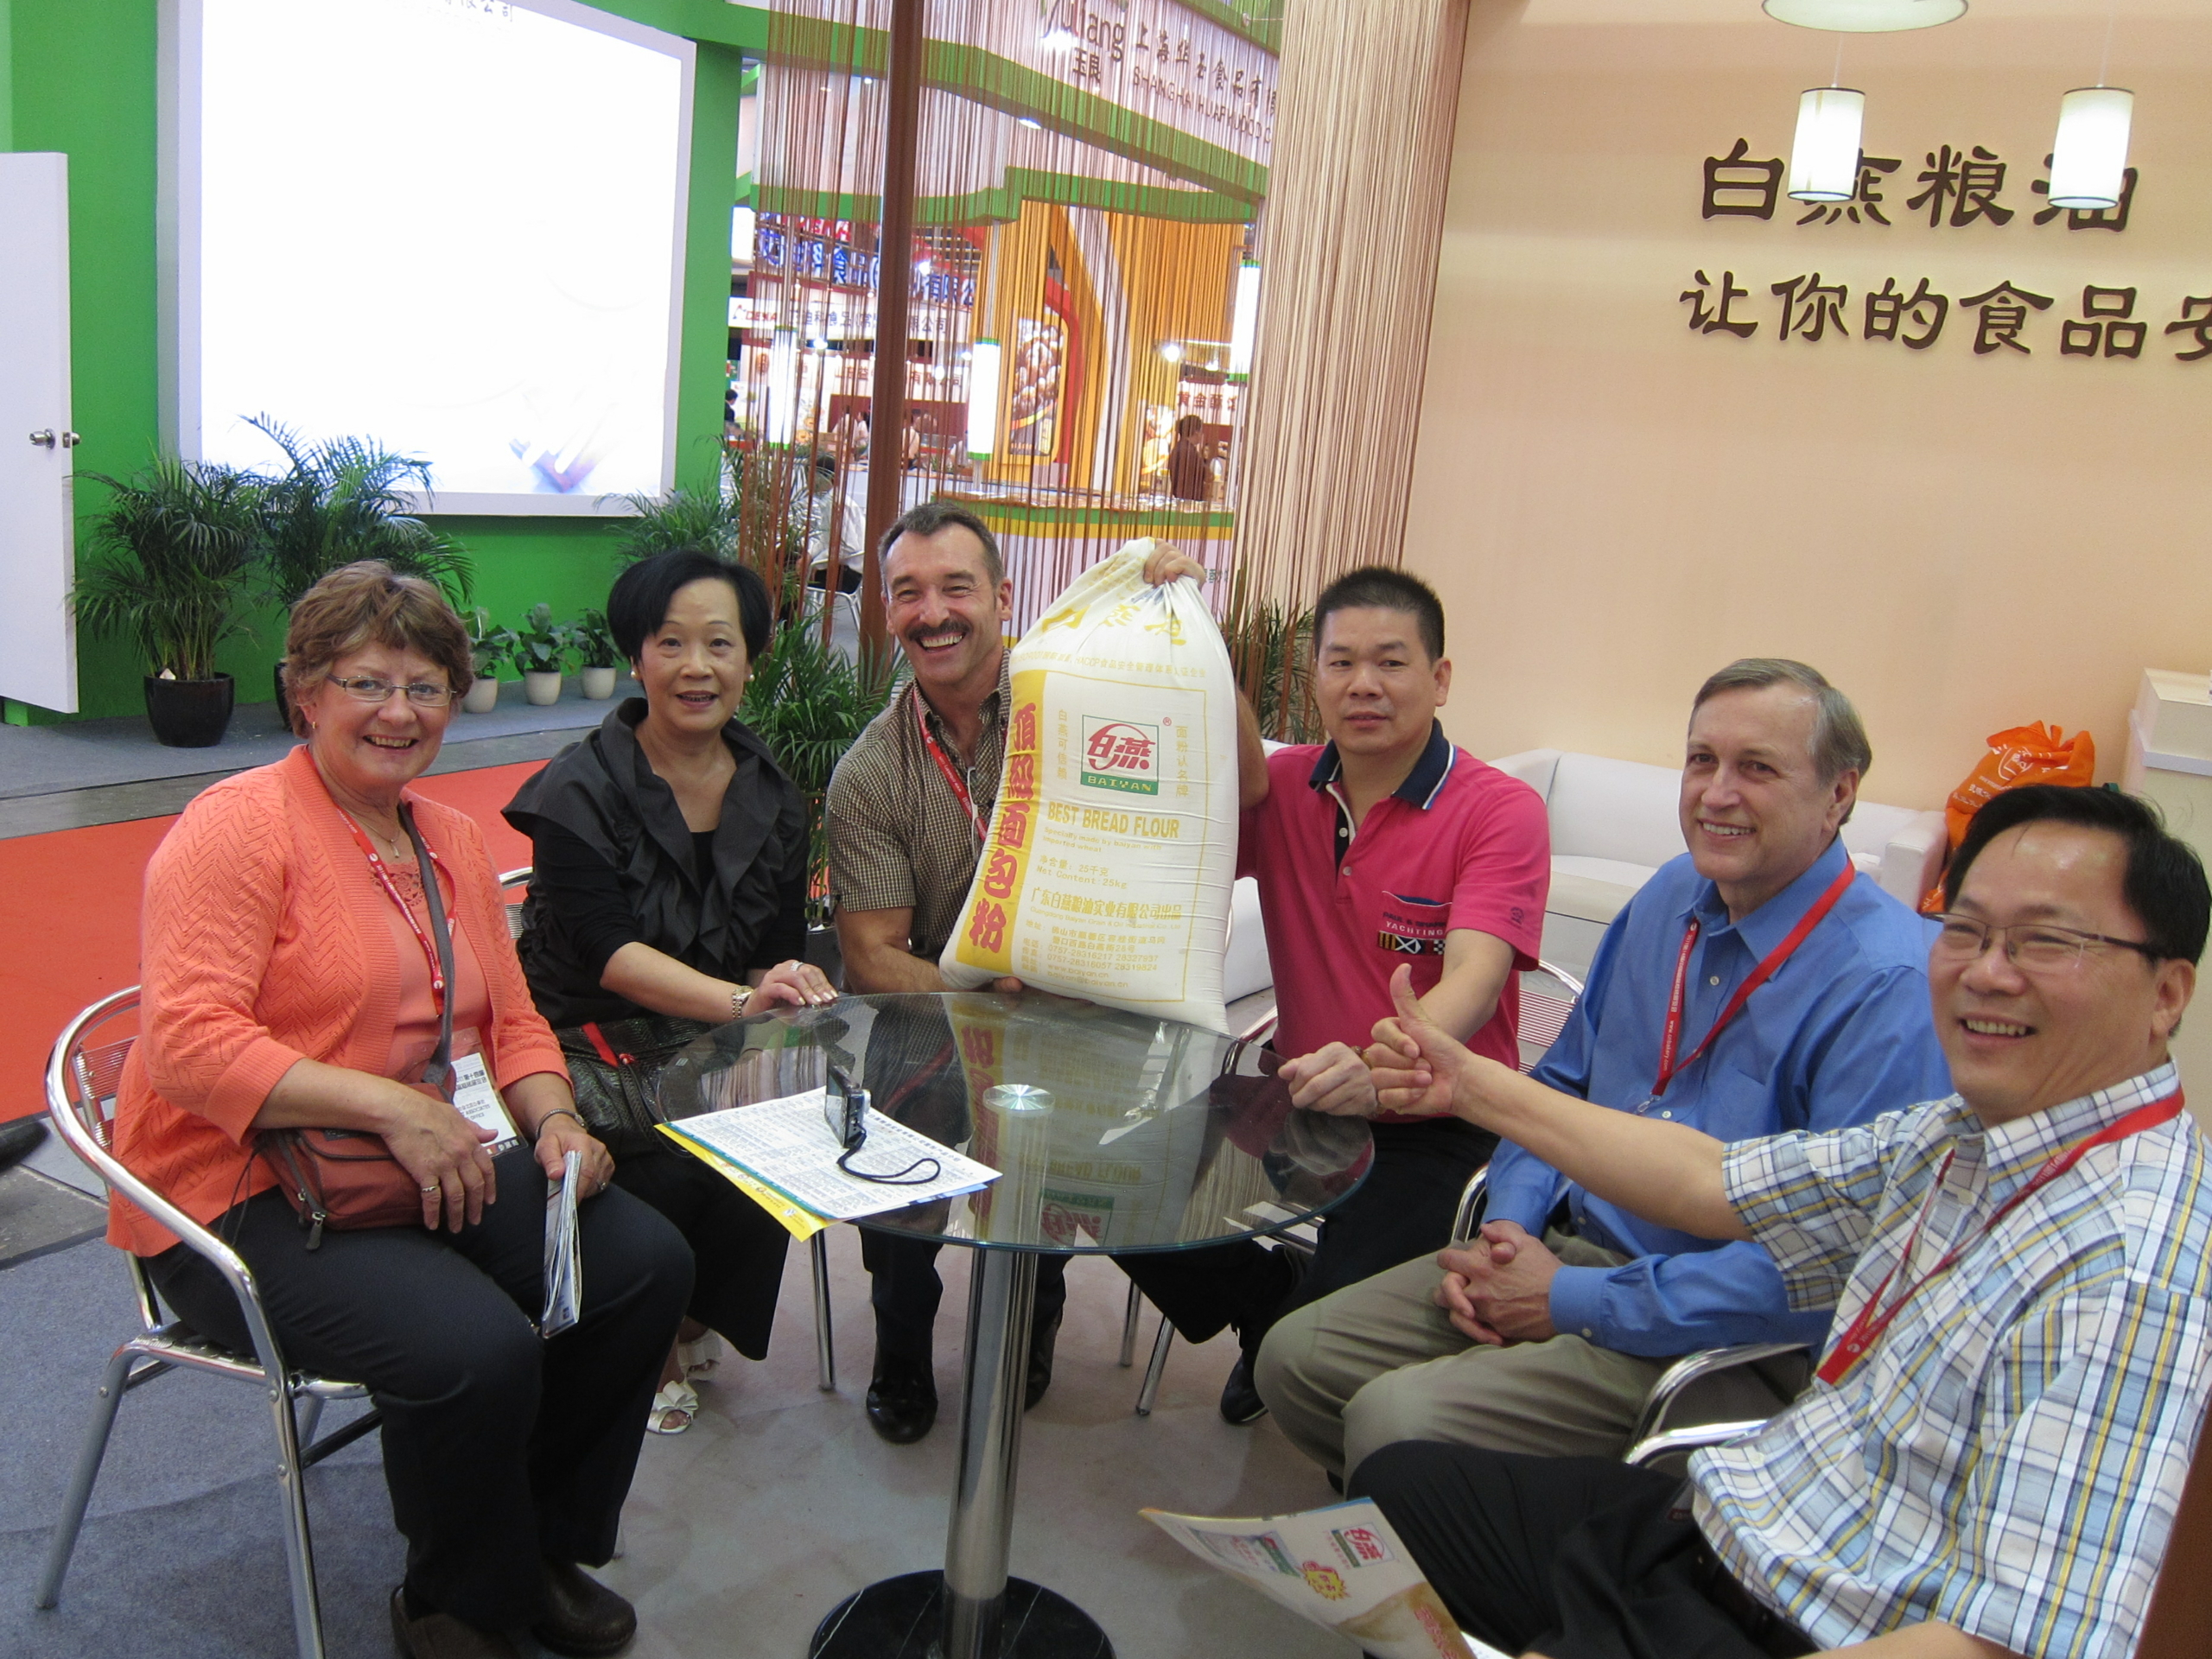 Matt Weimar with colleagues at a China food trade show.